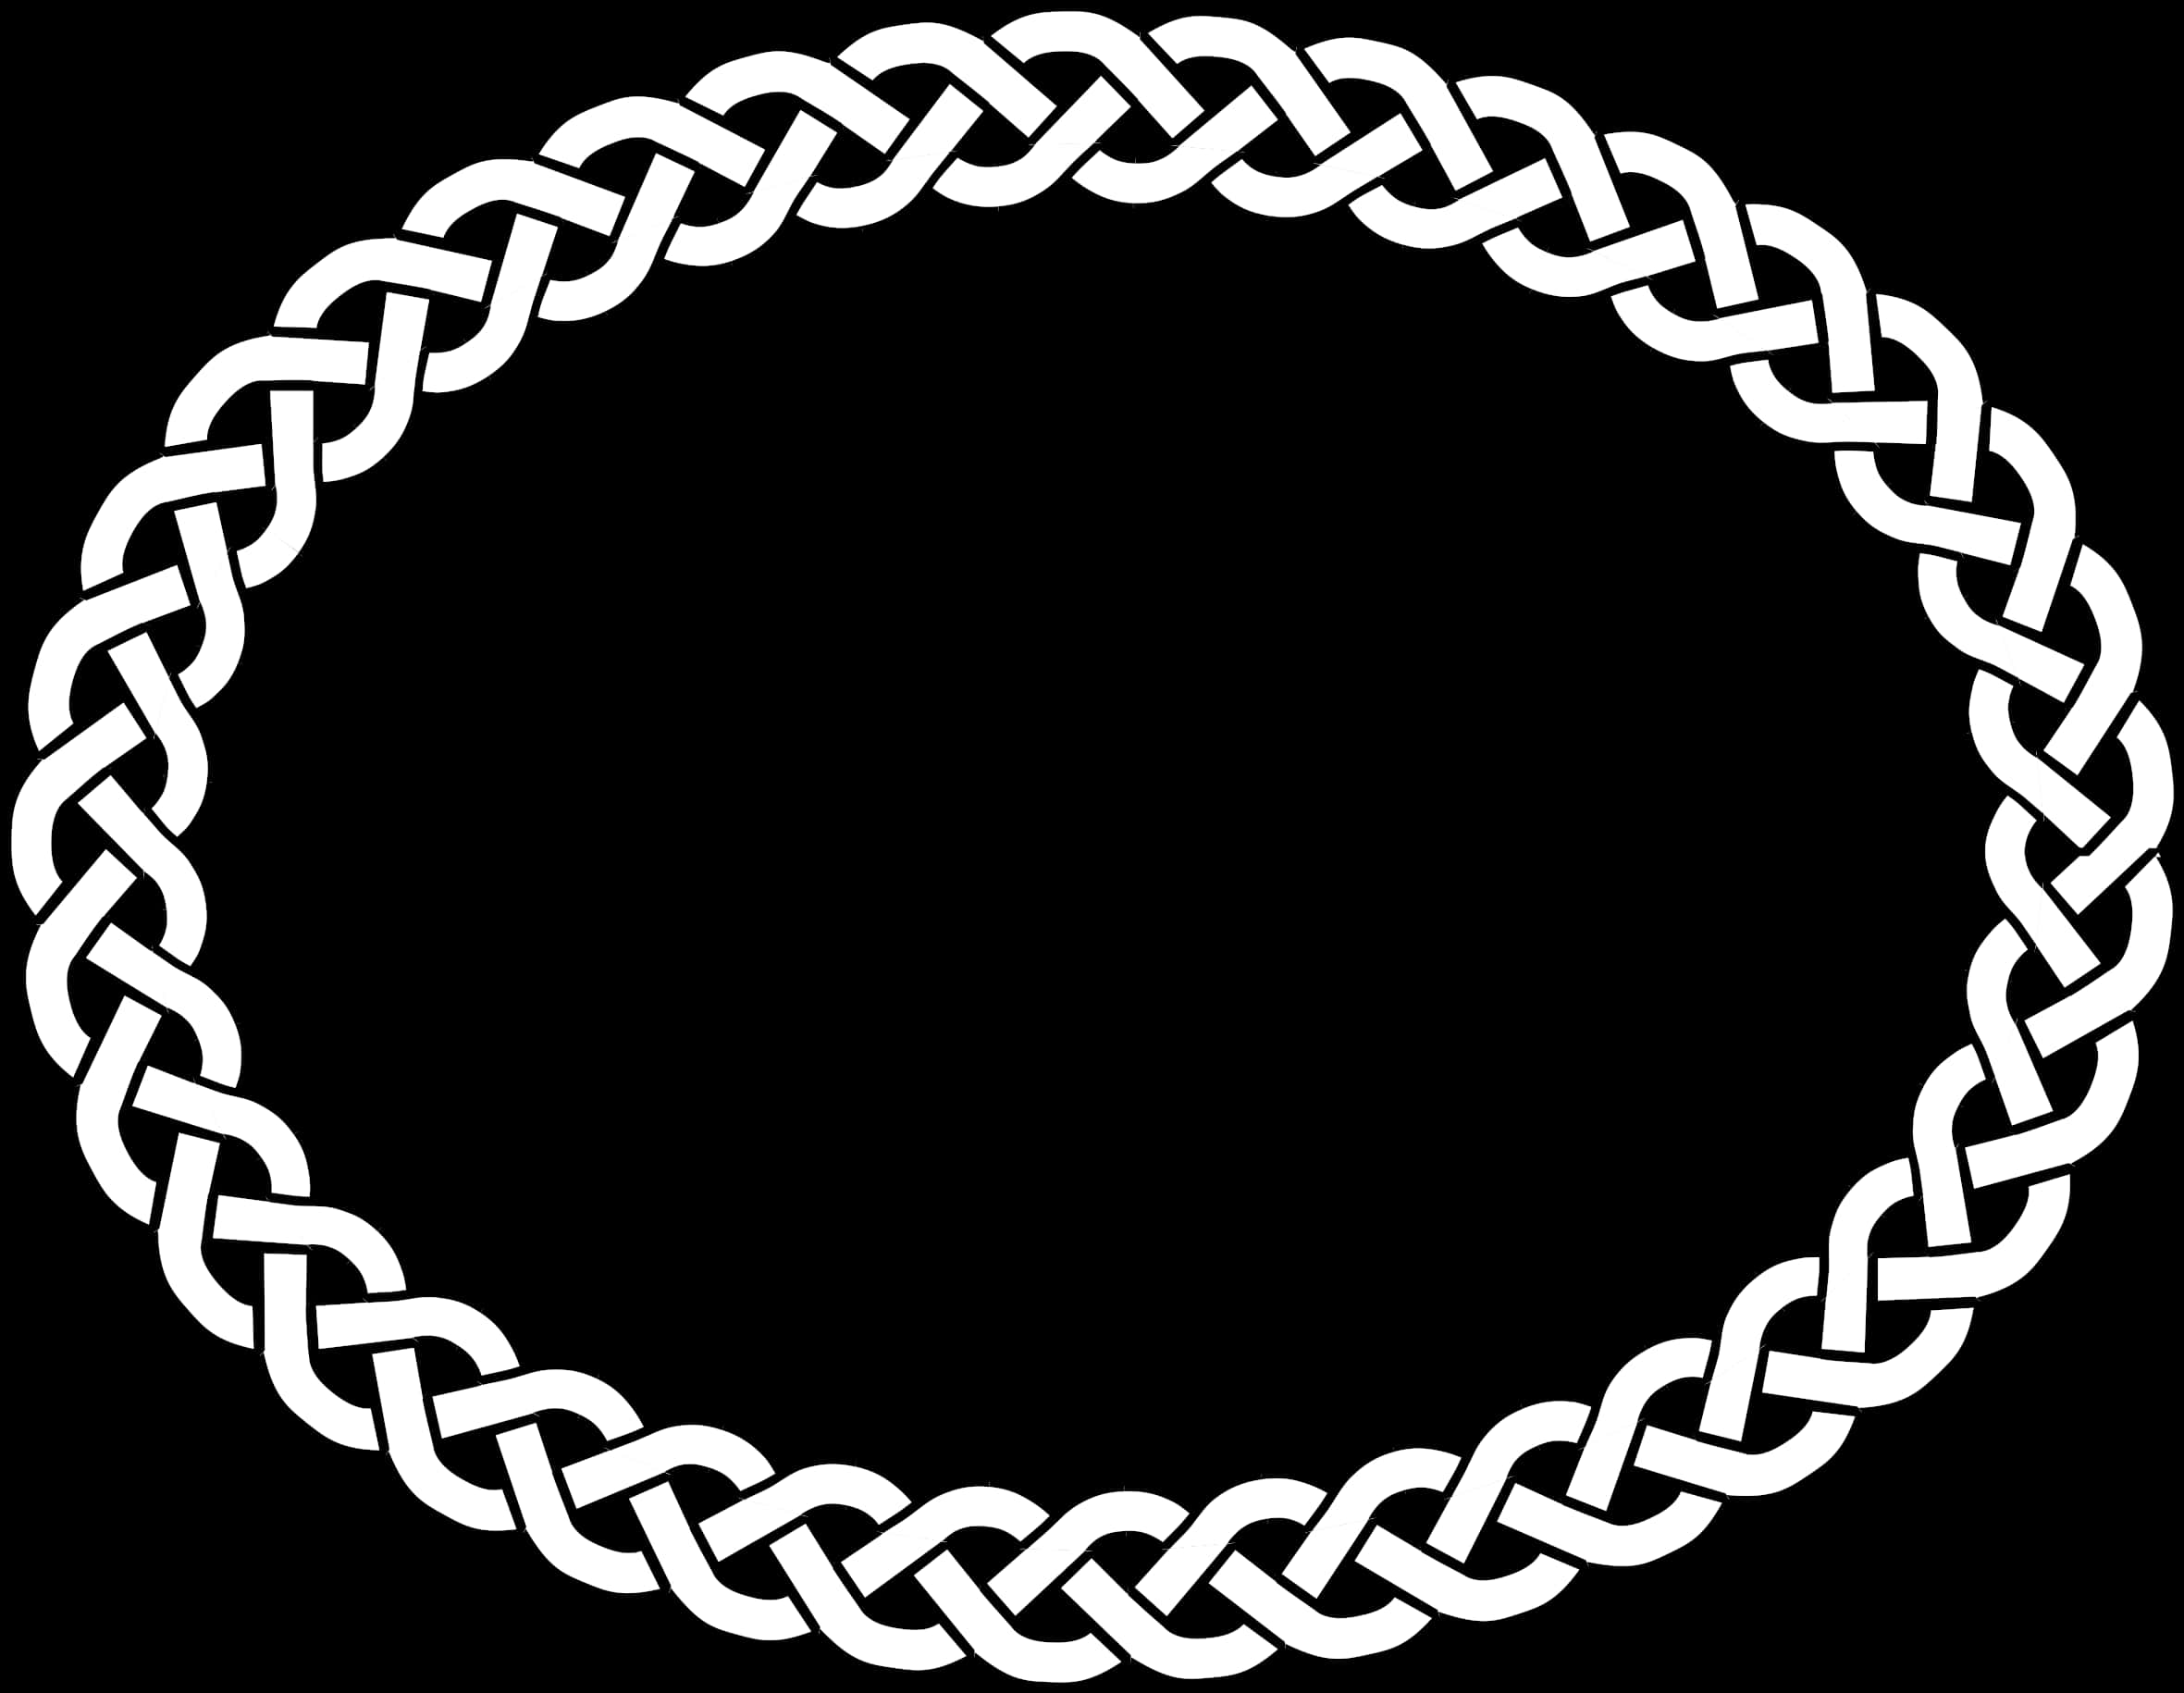 Circular Chain Link Vector Graphic